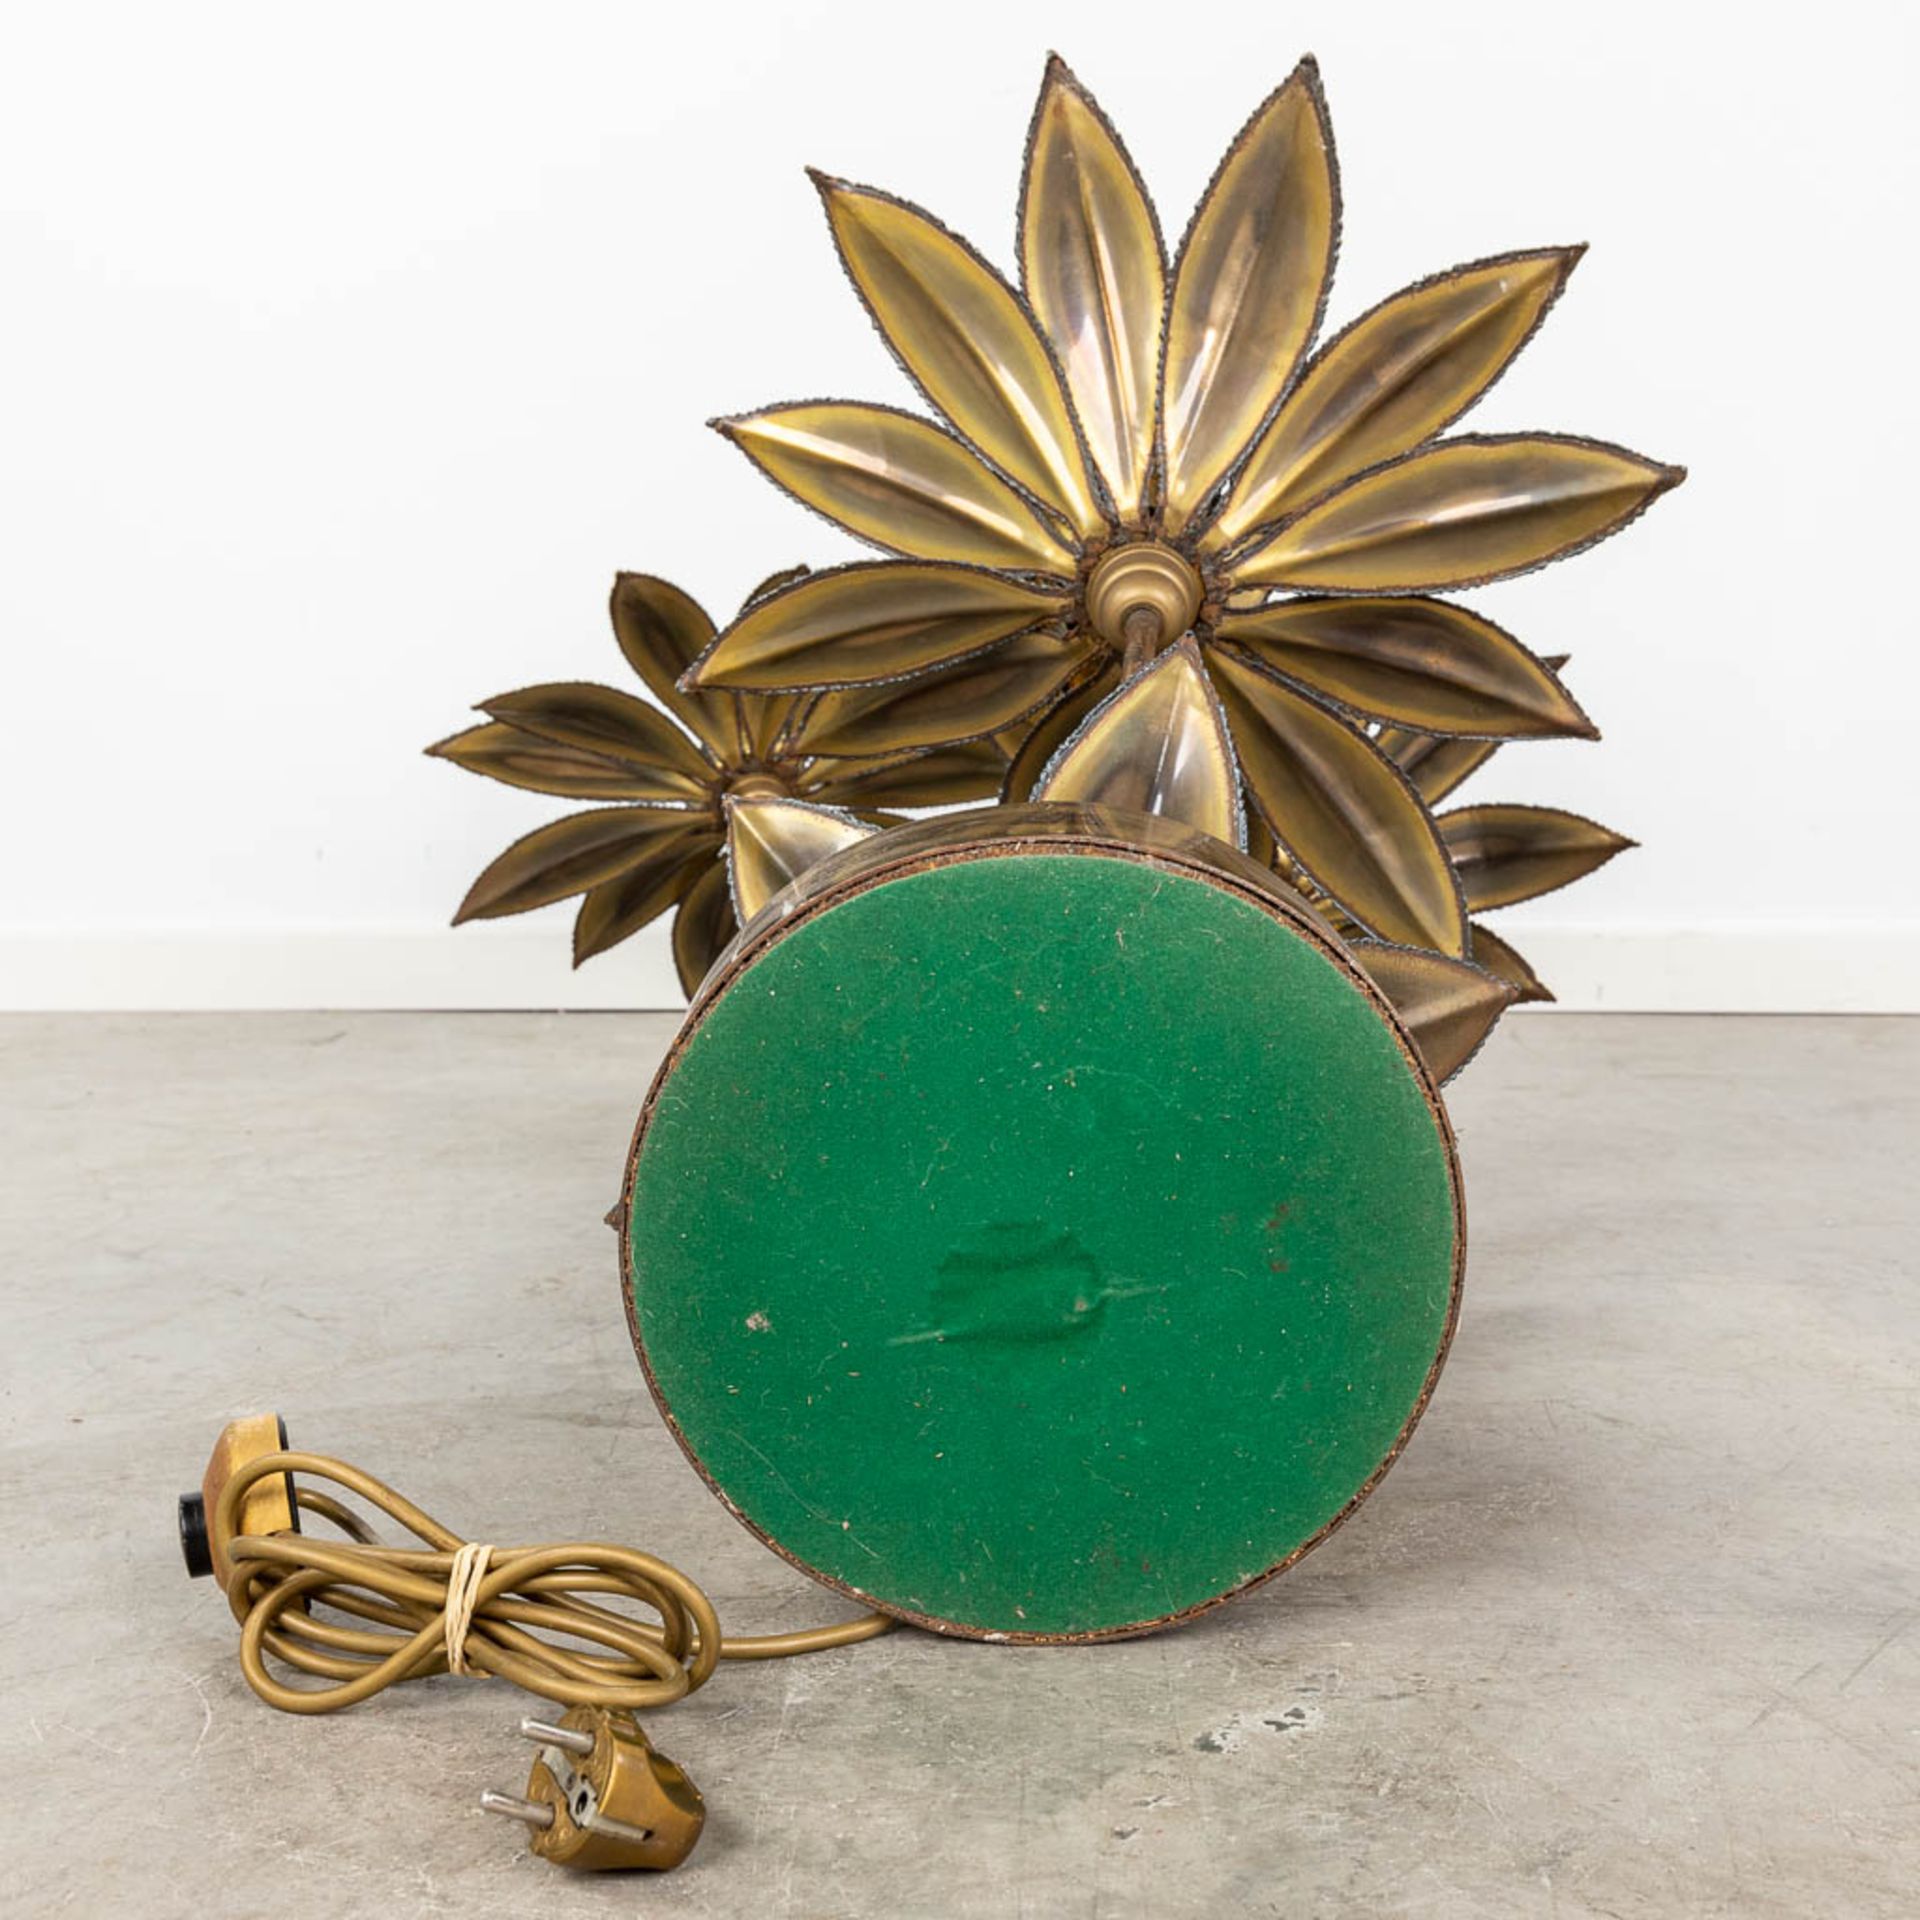 Maison Janssen, a table lamp made of metal flowers. (L:57 x W:68 x H:112 cm) - Image 15 of 15